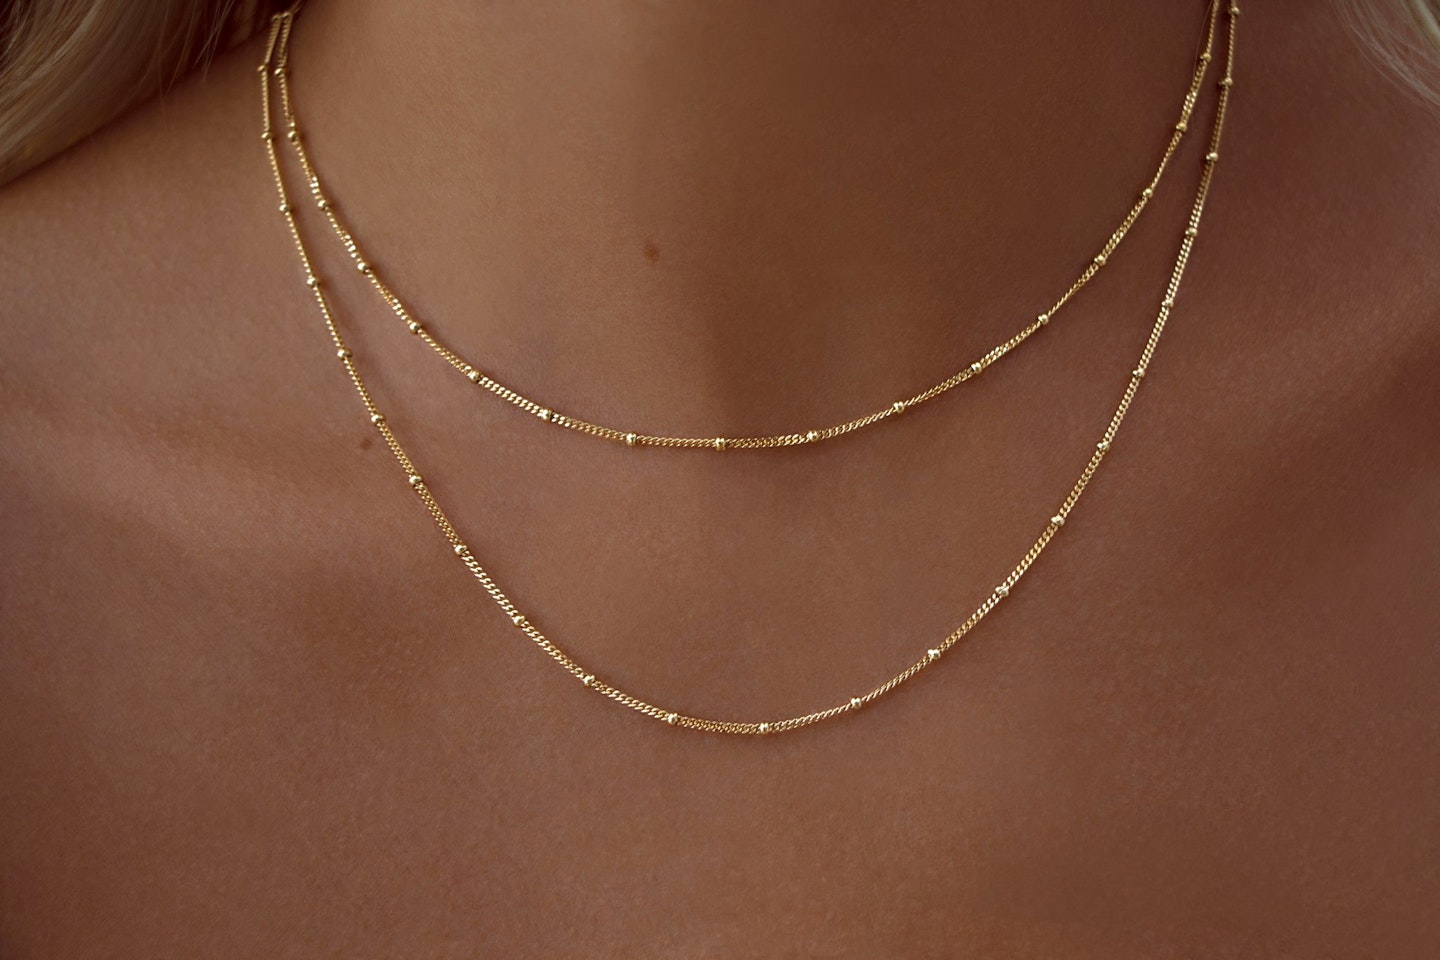 Spells of Love, Double Strand Beaded Satellite Chain Necklace 18K Gold Vermeil, £85